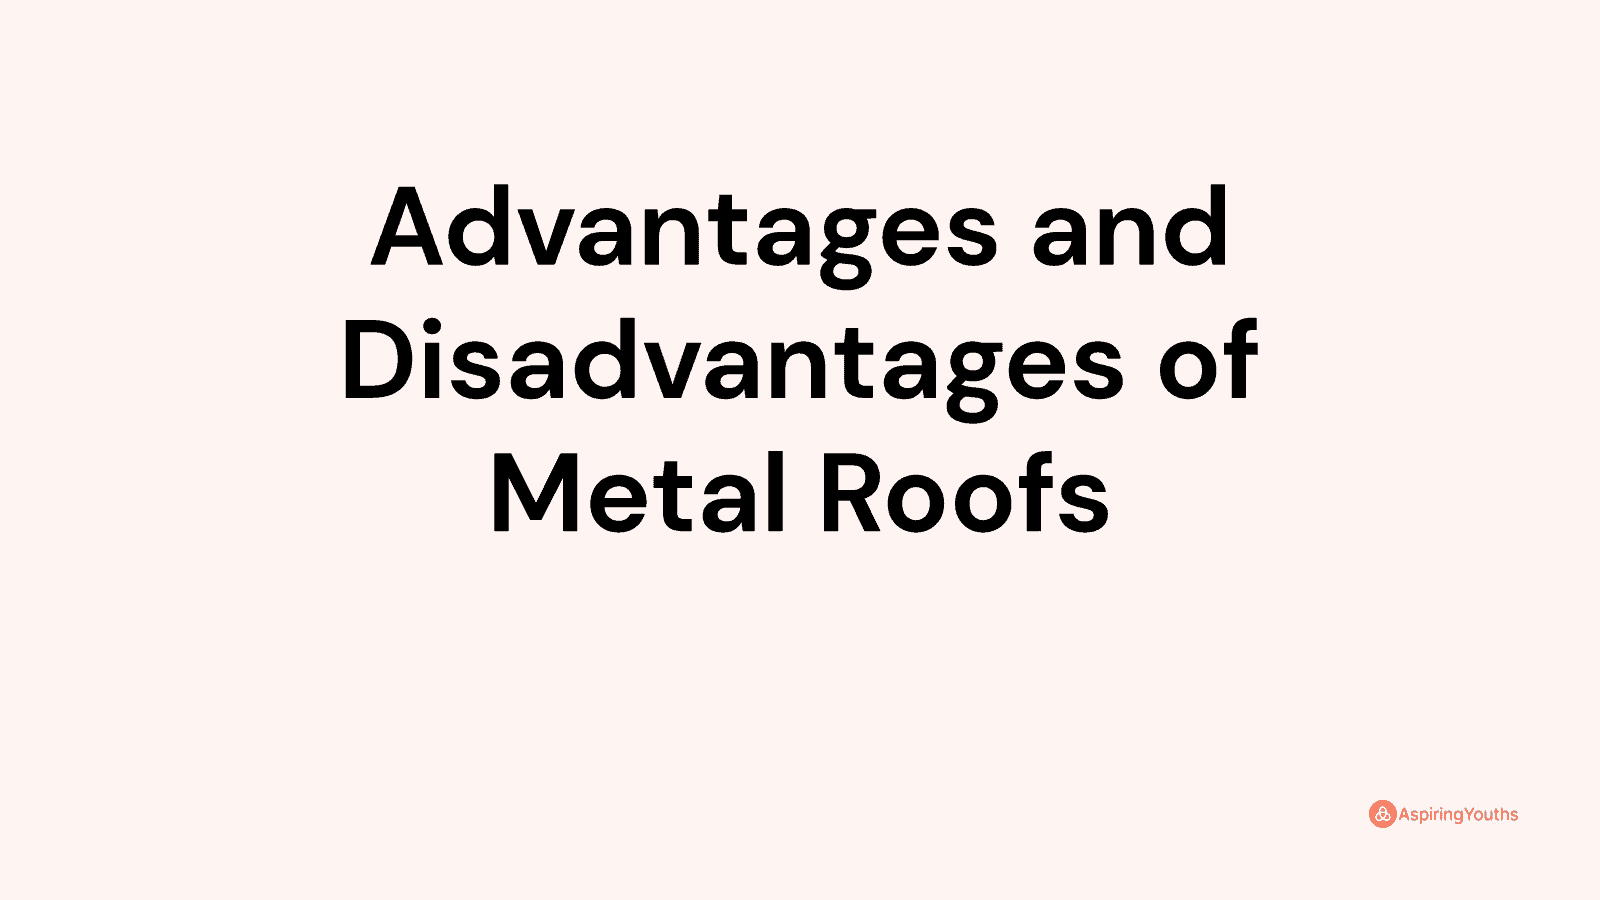 Advantages and disadvantages of Metal Roofs